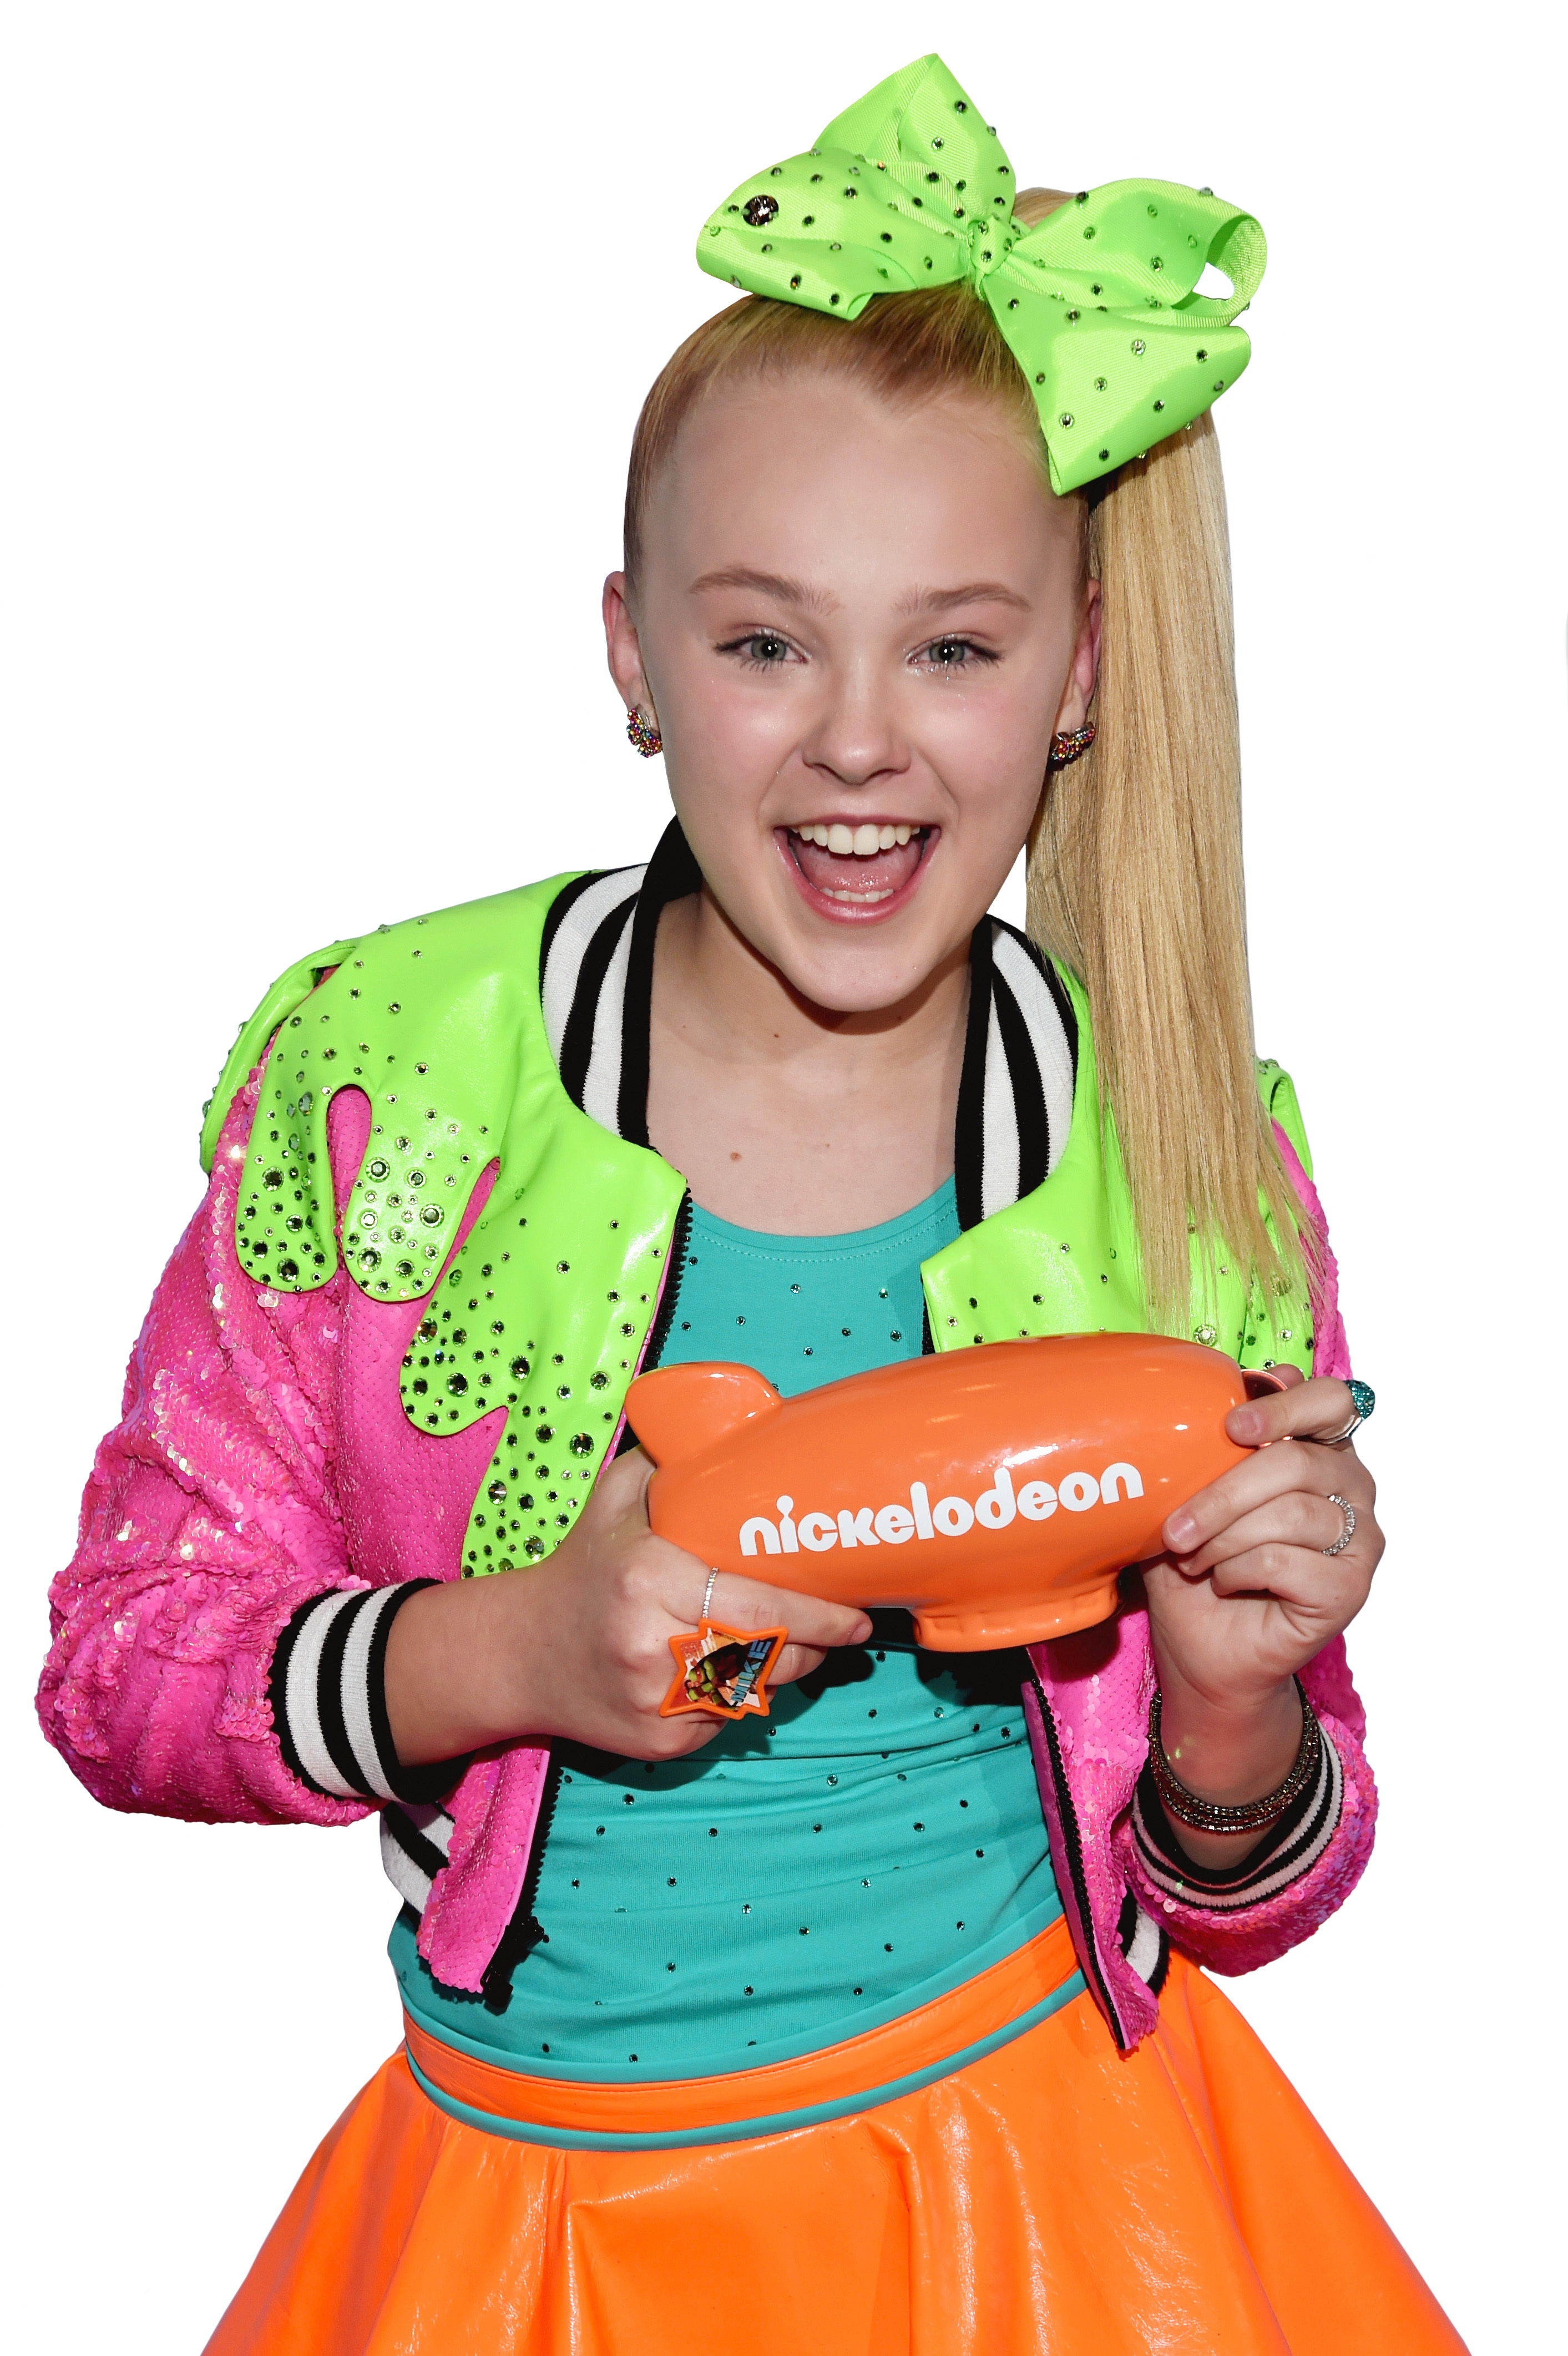 Nickelodeon Announces 2018 Kids’ Choice Awards Nominations | Business Wire2826 x 4246